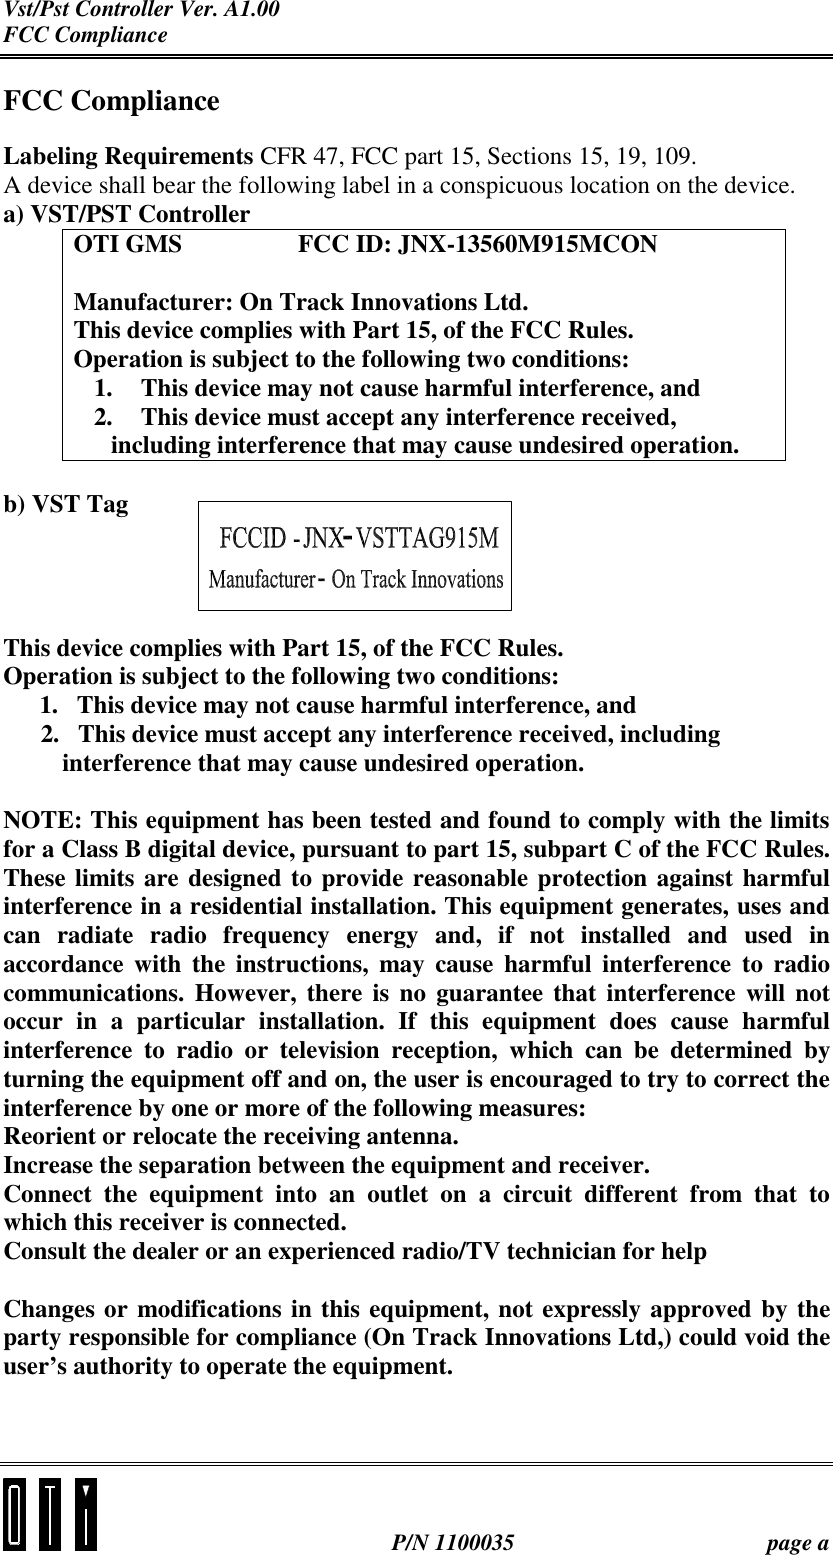 Vst/Pst Controller Ver. A1.00 FCC Compliance   P/N 1100035  page a FCC Compliance Labeling Requirements CFR 47, FCC part 15, Sections 15, 19, 109. A device shall bear the following label in a conspicuous location on the device. a) VST/PST Controller OTI GMS    FCC ID: JNX-13560M915MCON  Manufacturer: On Track Innovations Ltd. This device complies with Part 15, of the FCC Rules. Operation is subject to the following two conditions: 1.  This device may not cause harmful interference, and 2.  This device must accept any interference received, including interference that may cause undesired operation.  b) VST Tag     This device complies with Part 15, of the FCC Rules. Operation is subject to the following two conditions: 1.  This device may not cause harmful interference, and       2.   This device must accept any interference received, including    interference that may cause undesired operation.  NOTE: This equipment has been tested and found to comply with the limits for a Class B digital device, pursuant to part 15, subpart C of the FCC Rules. These limits are designed to provide reasonable protection against harmful interference in a residential installation. This equipment generates, uses and can radiate radio frequency energy and, if not installed and used in accordance with the instructions, may cause harmful interference to radio communications. However, there is no guarantee that interference will not occur in a particular installation. If this equipment does cause harmful interference to radio or television reception, which can be determined by turning the equipment off and on, the user is encouraged to try to correct the interference by one or more of the following measures: Reorient or relocate the receiving antenna. Increase the separation between the equipment and receiver. Connect the equipment into an outlet on a circuit different from that to which this receiver is connected. Consult the dealer or an experienced radio/TV technician for help  Changes or modifications in this equipment, not expressly approved by the party responsible for compliance (On Track Innovations Ltd,) could void the user’s authority to operate the equipment.  